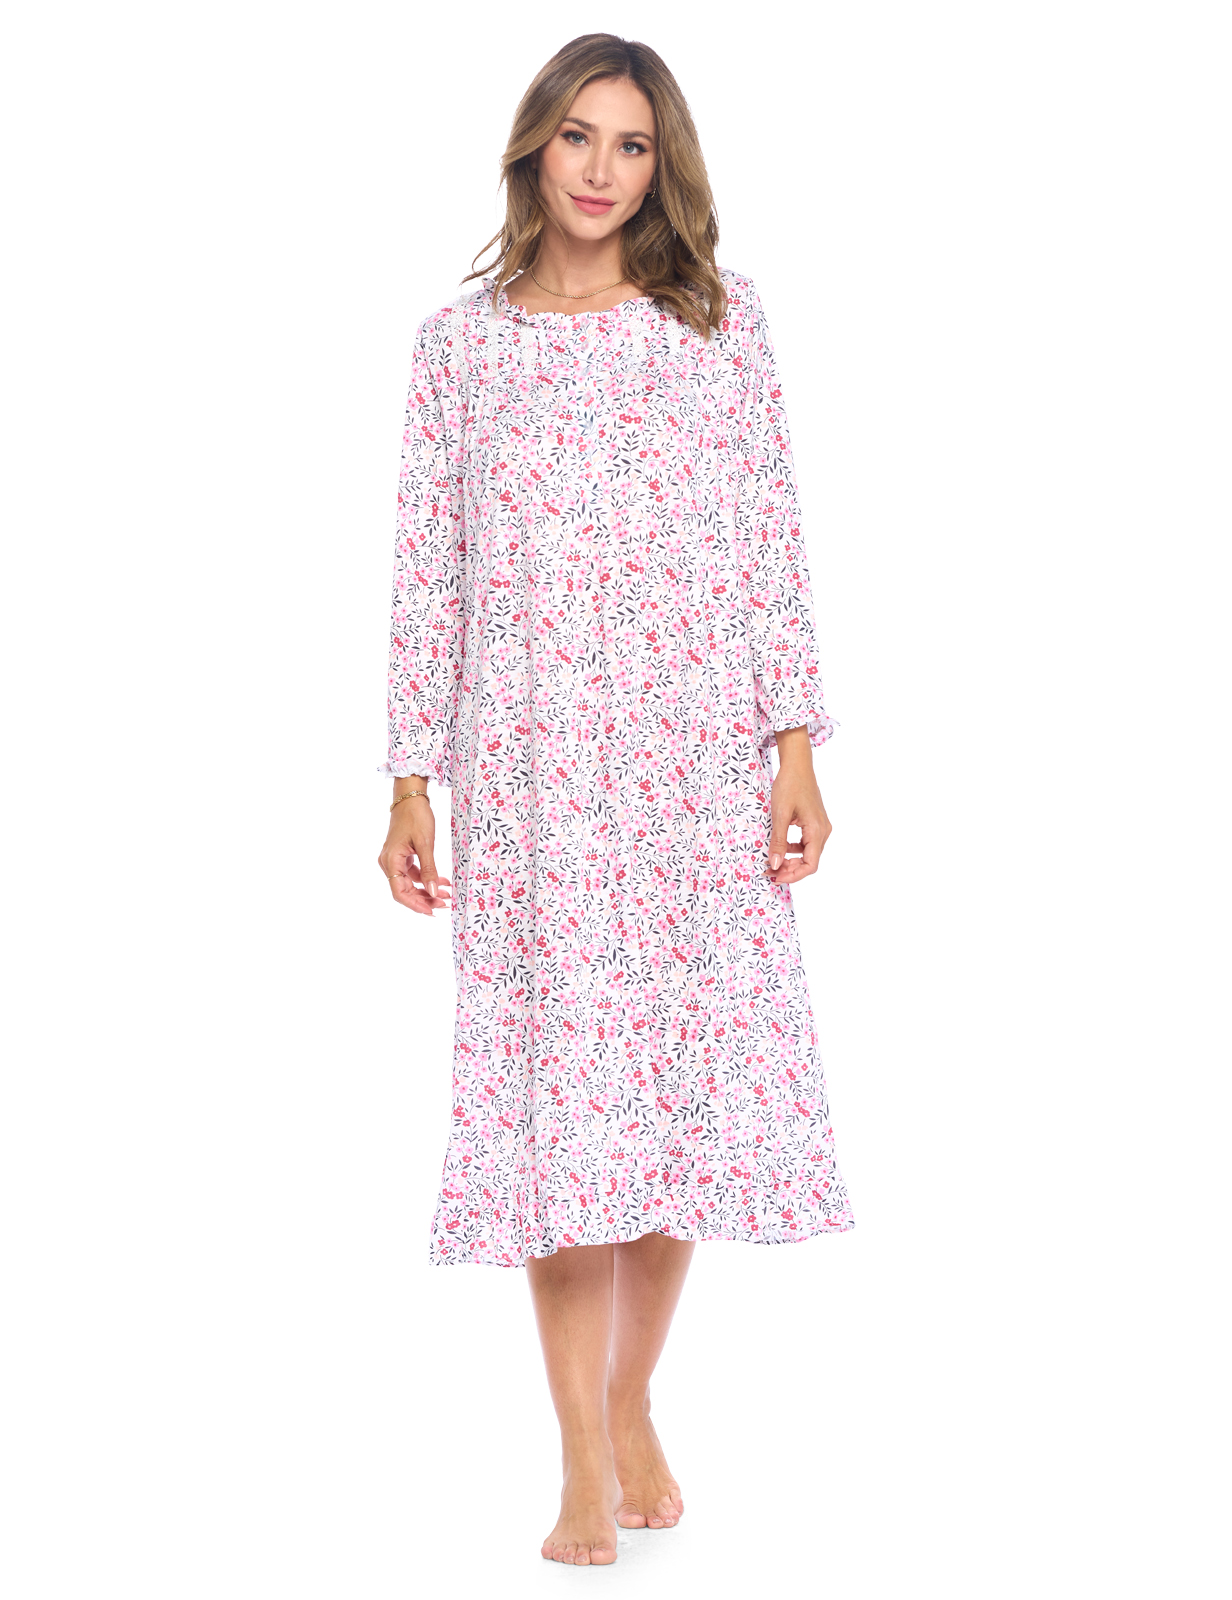 Casual Nights Women's Long Floral & Lace Henley Nightgown - Pink